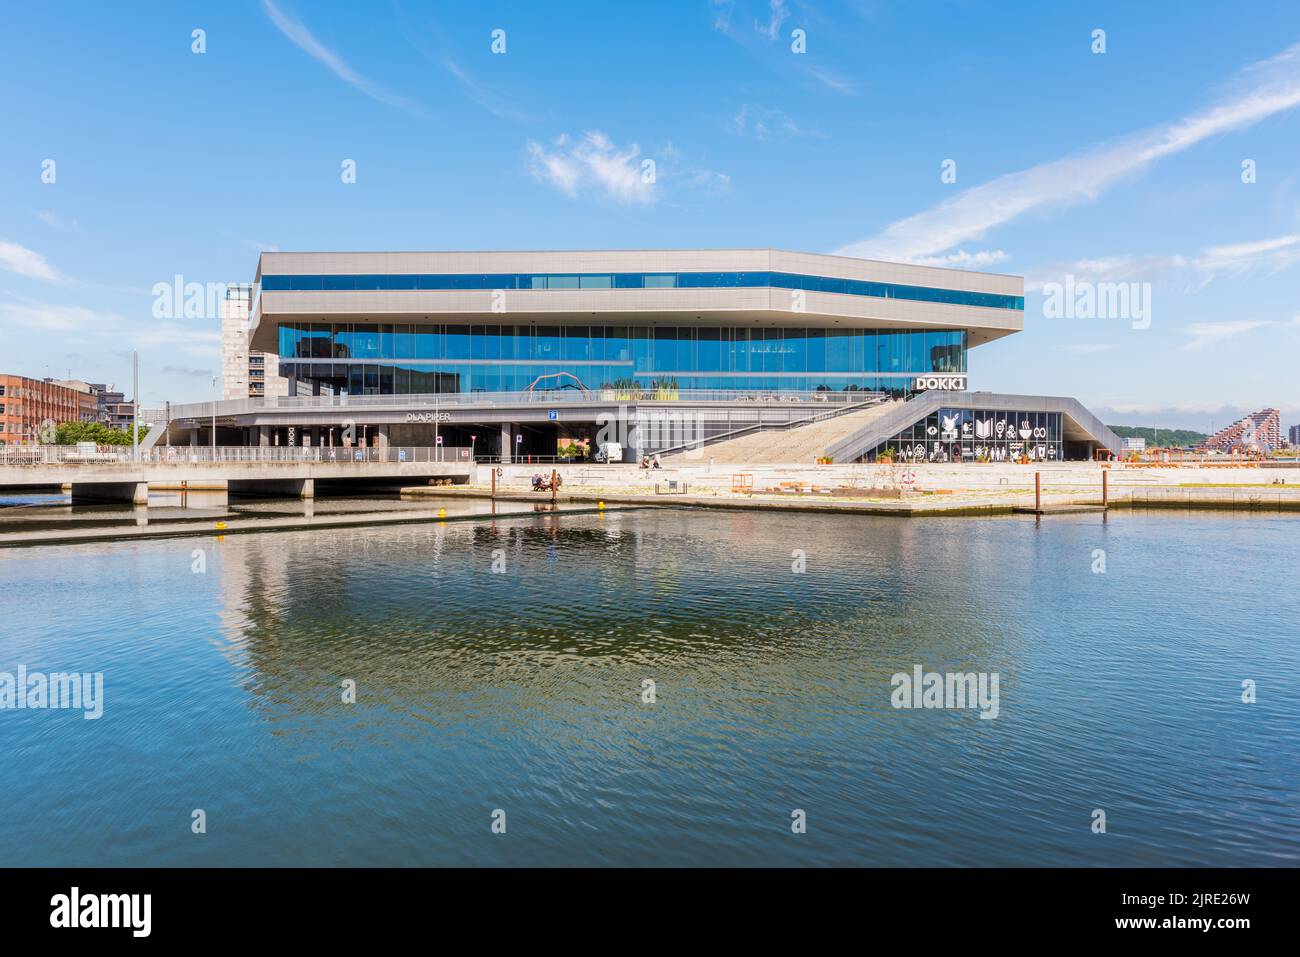 Dokk1 Building in Aarhus, Denmark. It is a public library and culture center near the harbor and was completed in 2015. Stock Photo